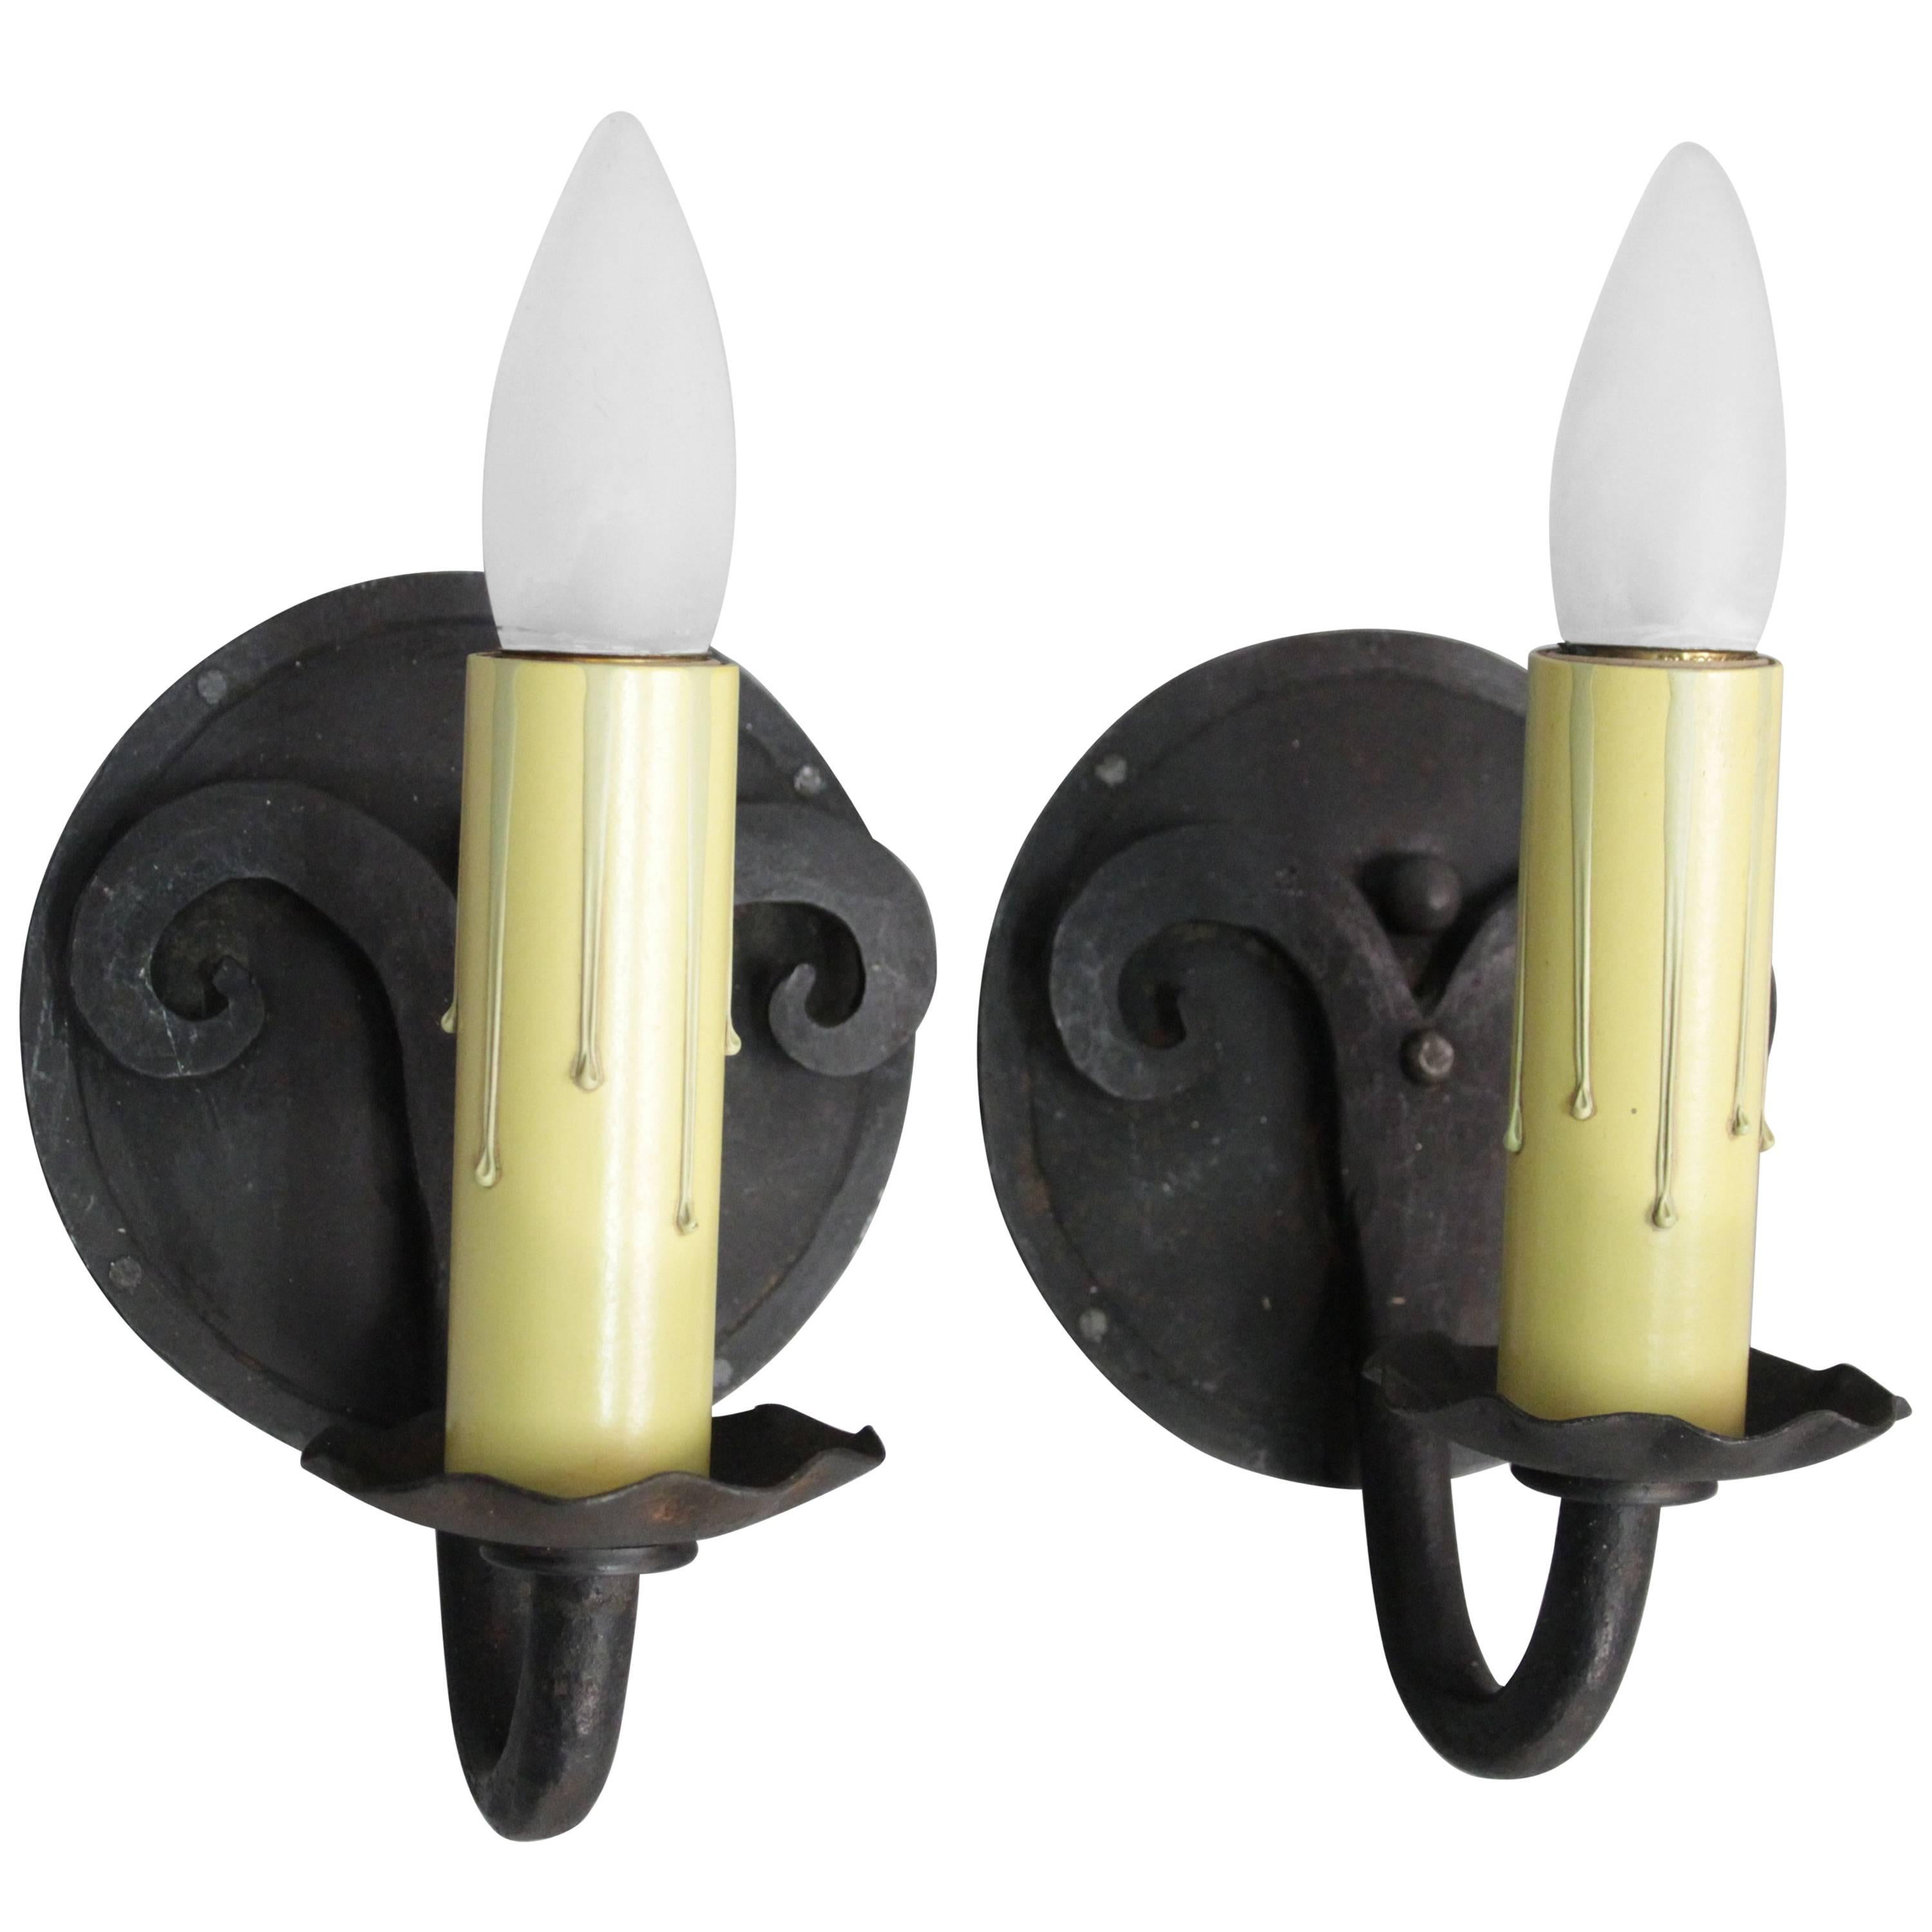 Pair of Single Wrought Iron Spanish Sconces with Round Backplate